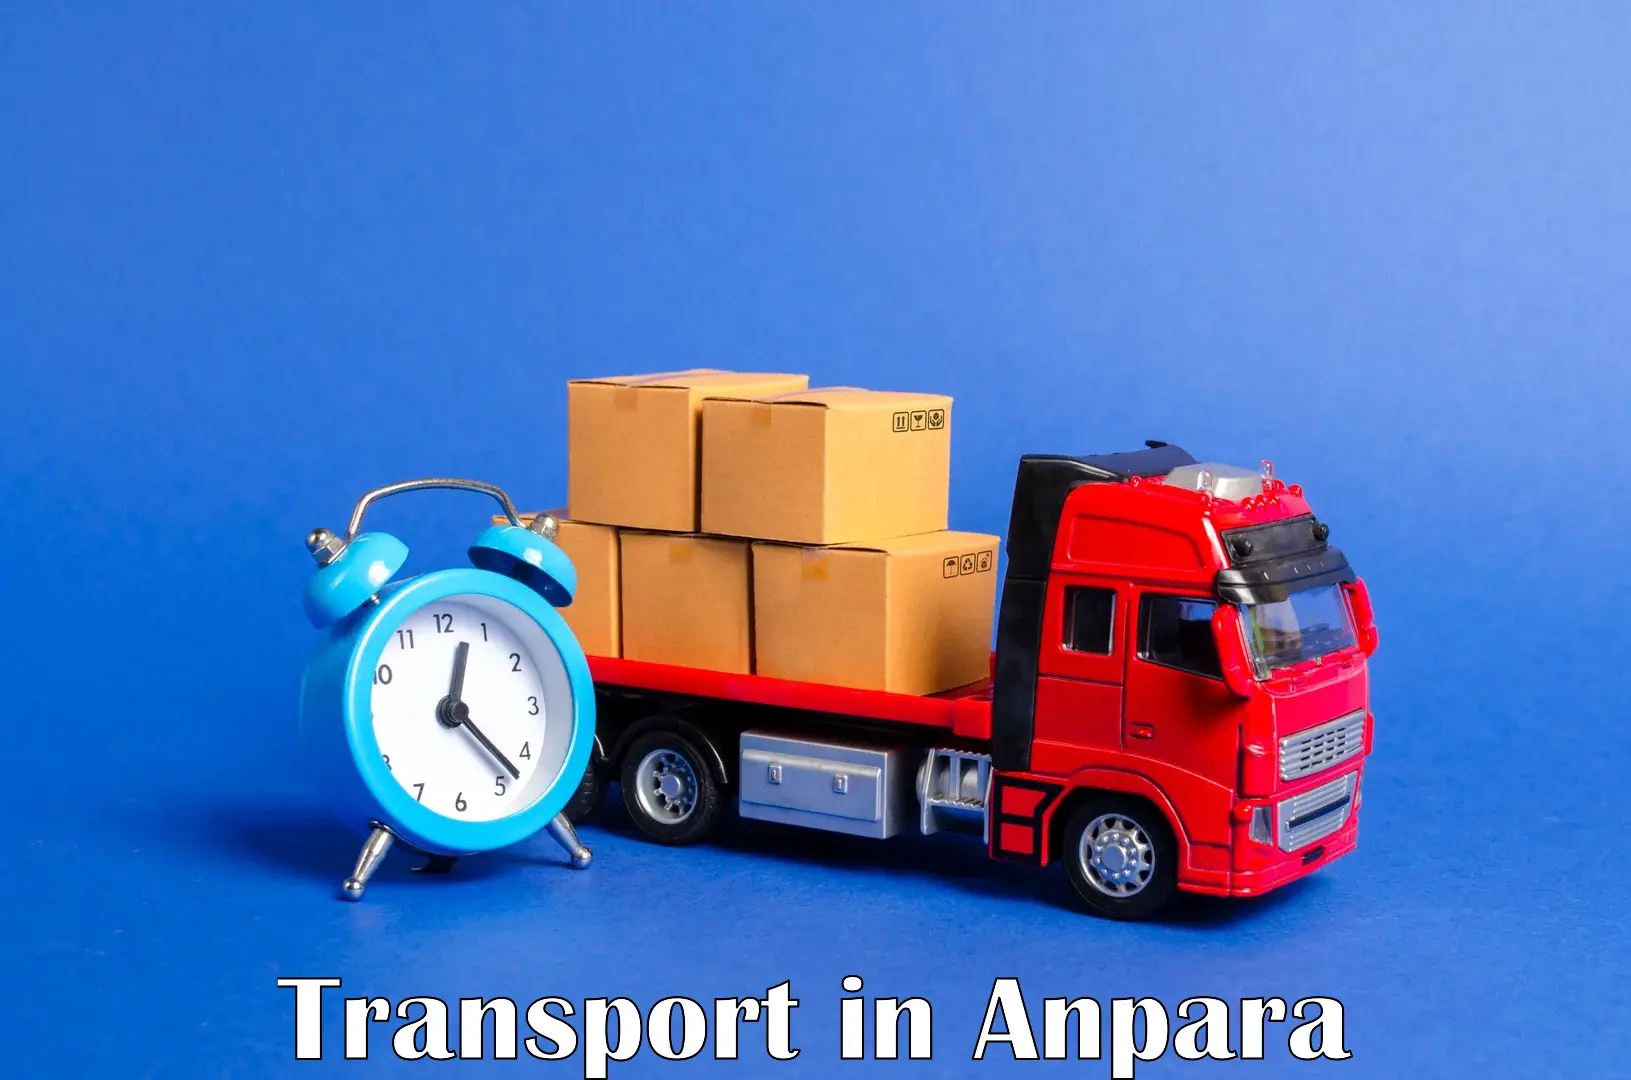 Express transport services in Anpara